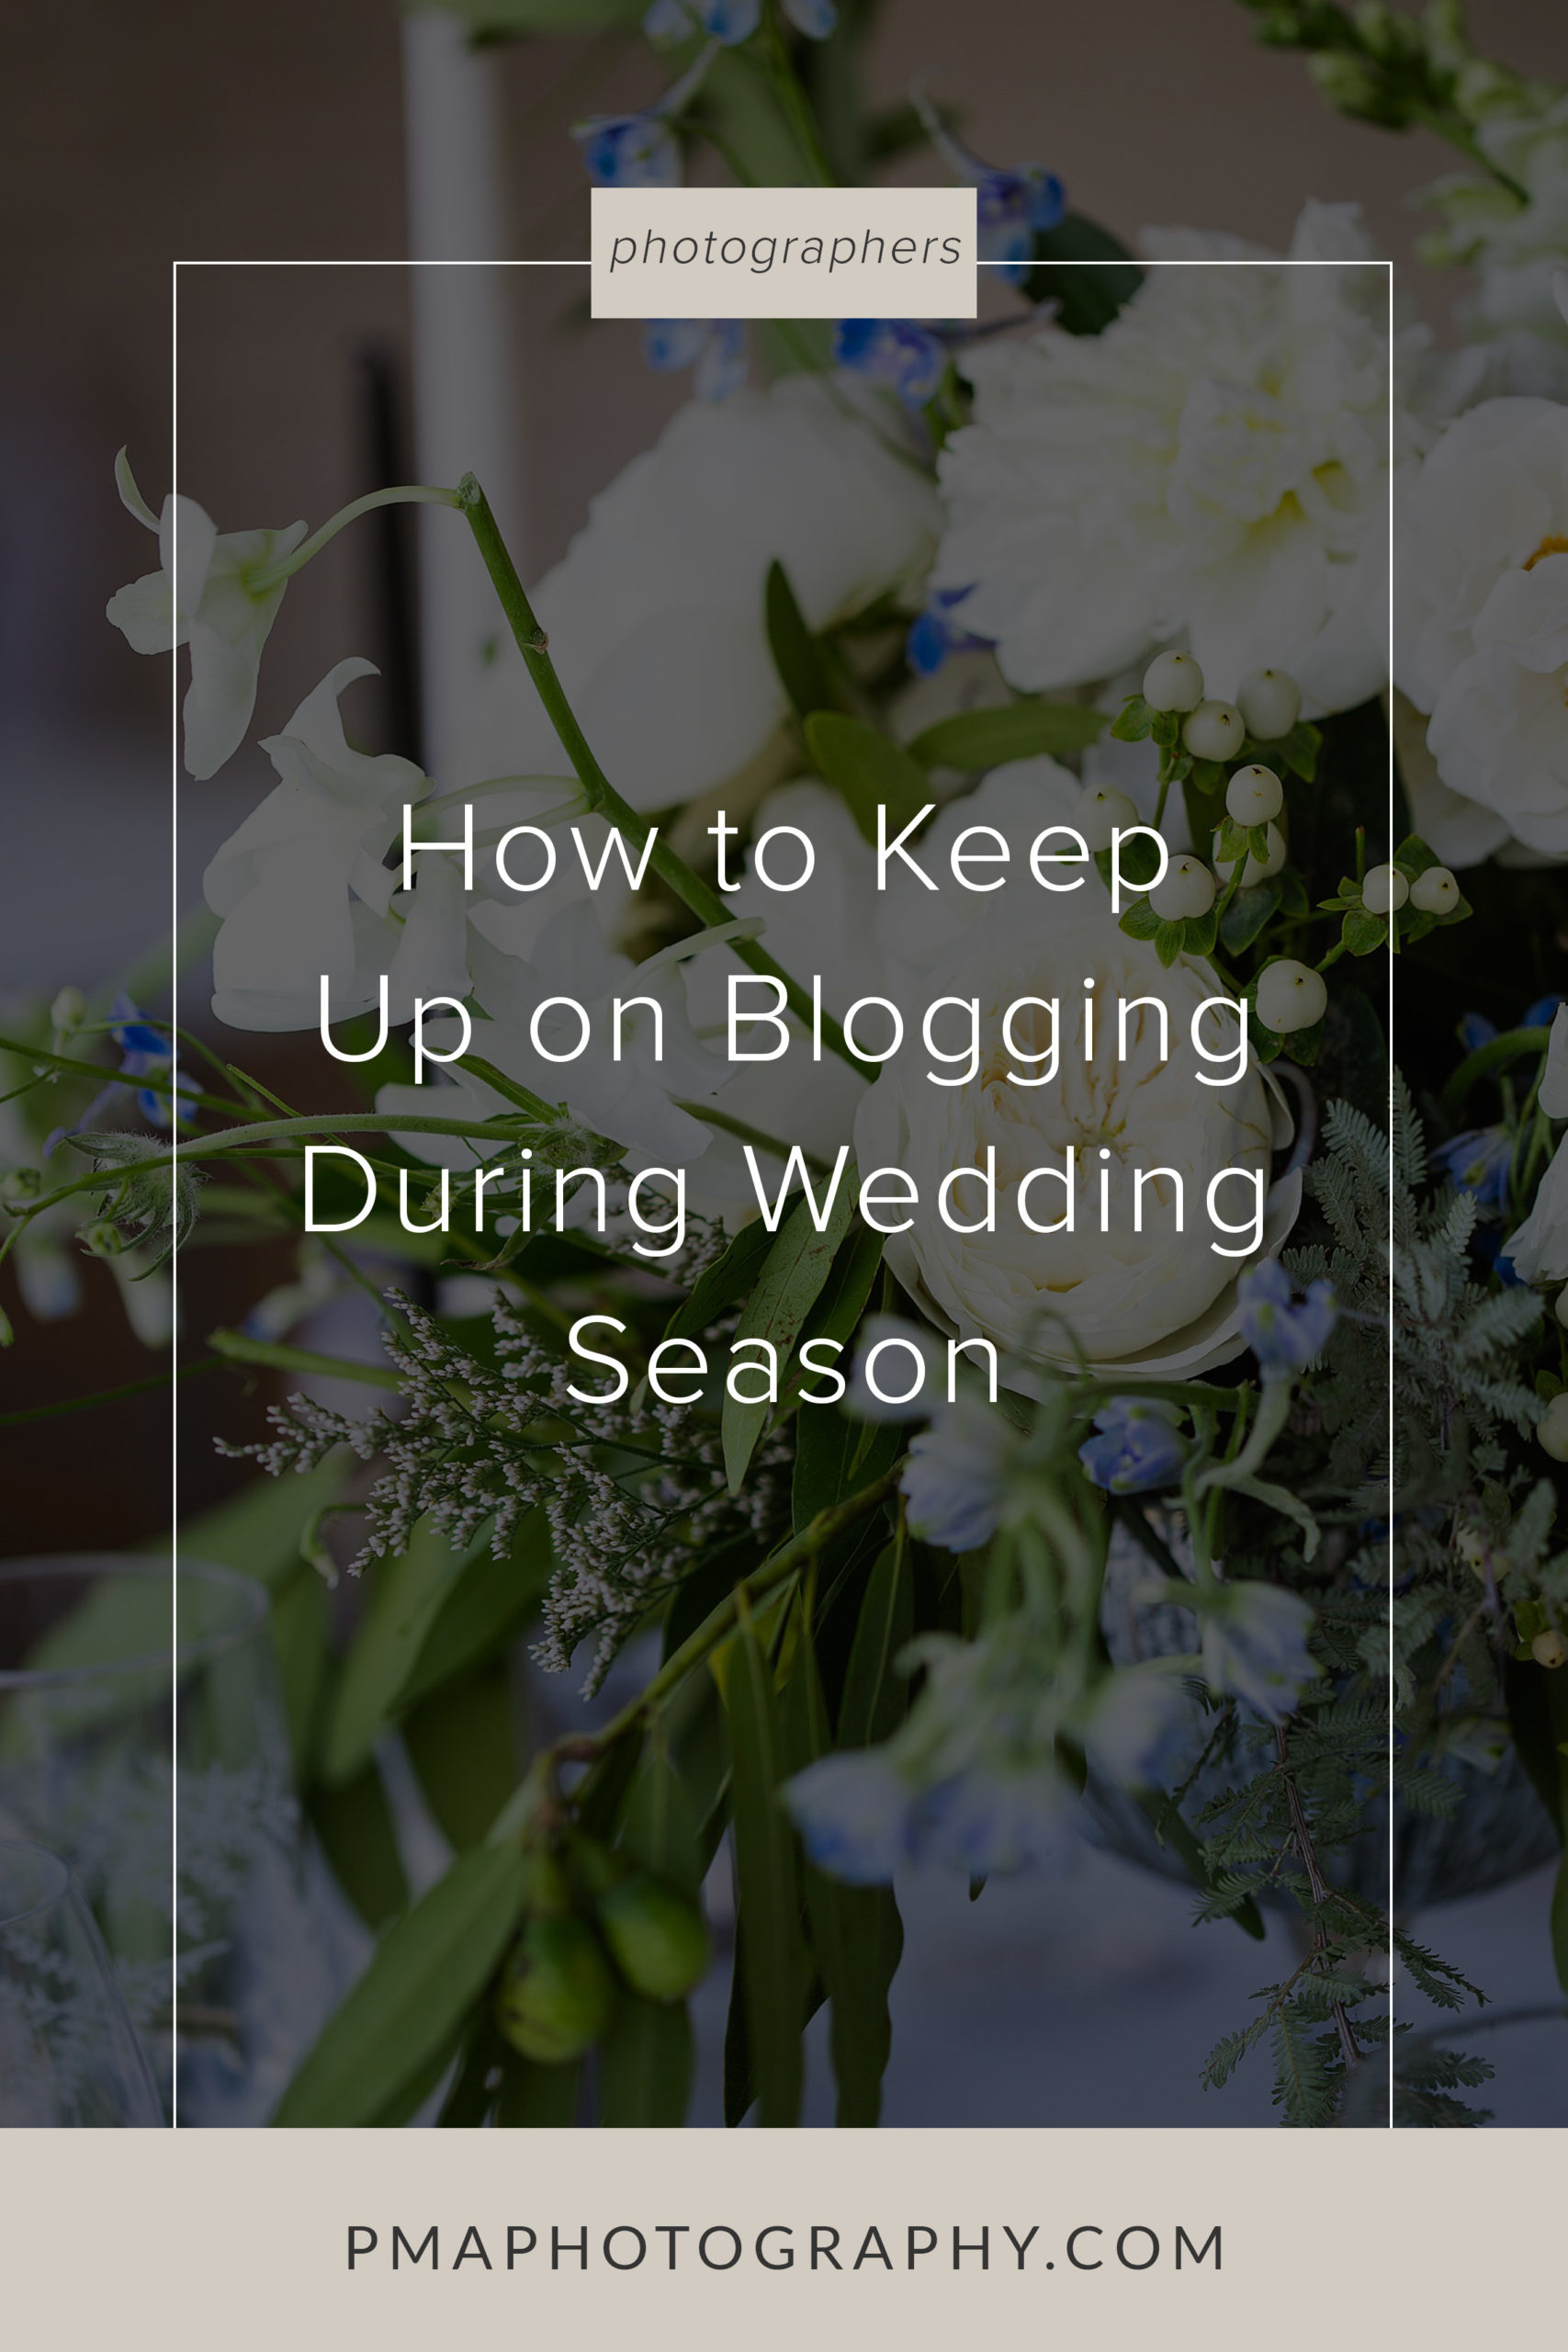 How to maintain blogging weddings and engagement sessions during wedding season.